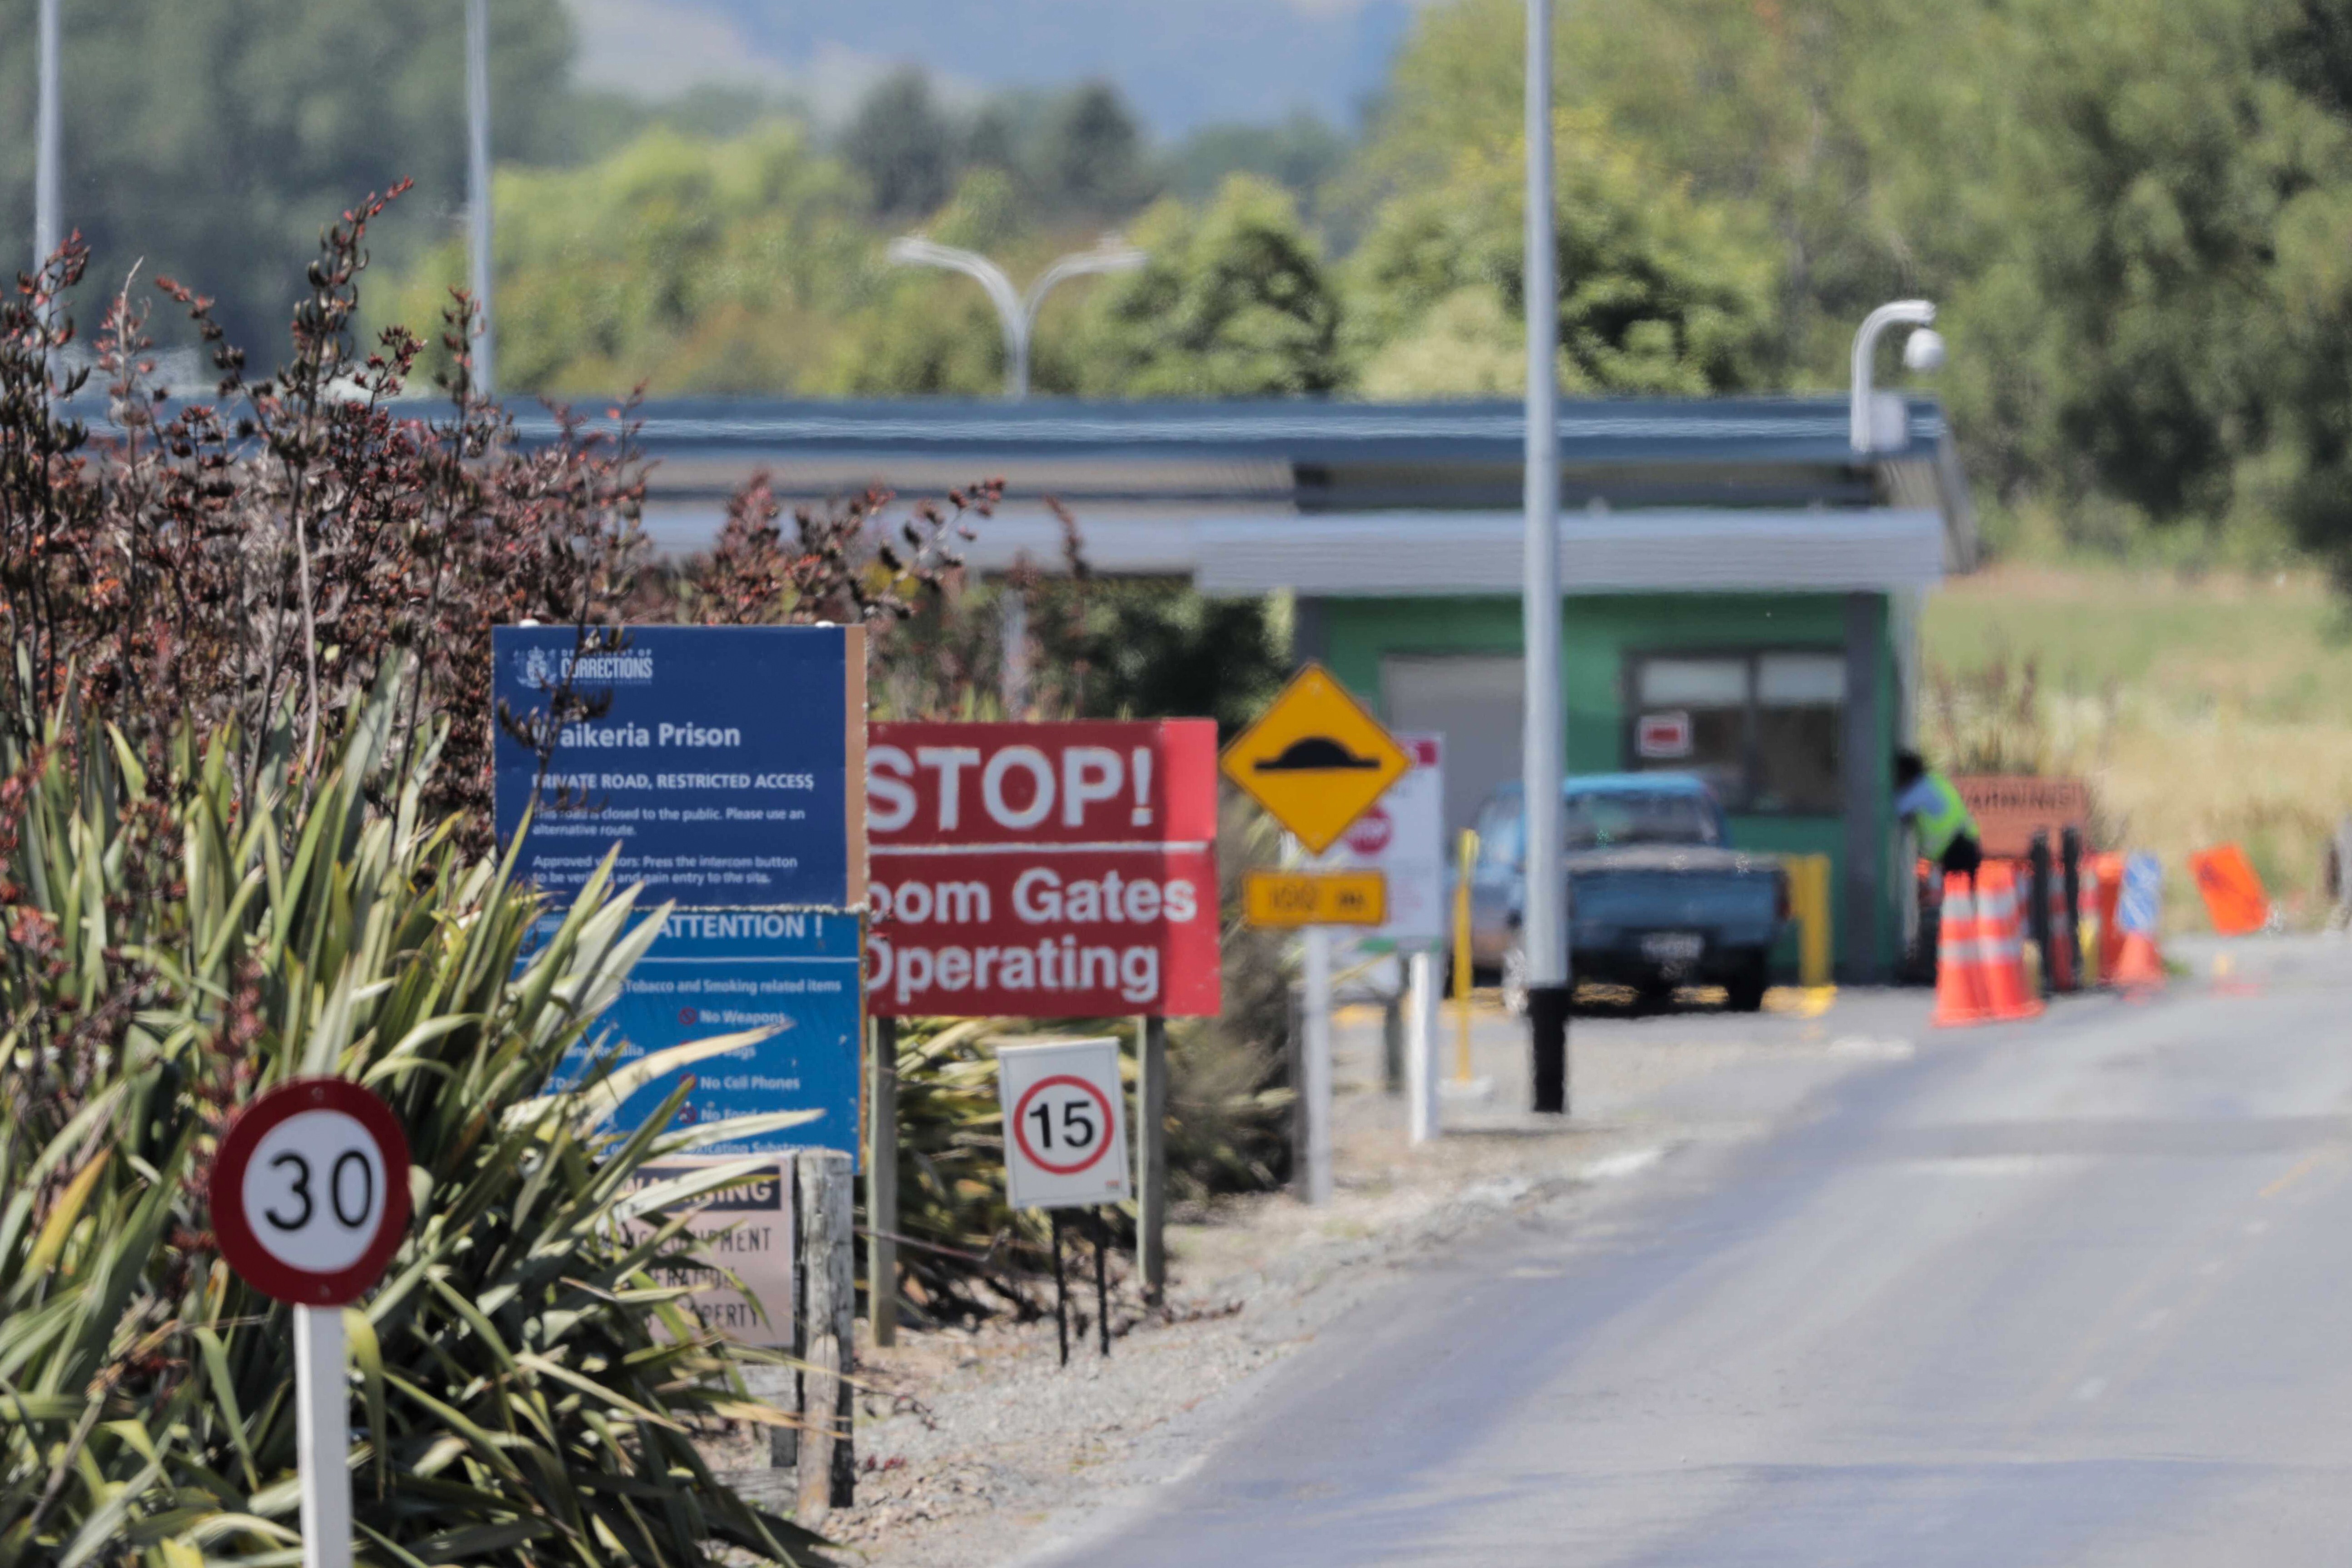 Security outside Waikeria Prison was tightened during the stand-off. Photo: NZ Herald